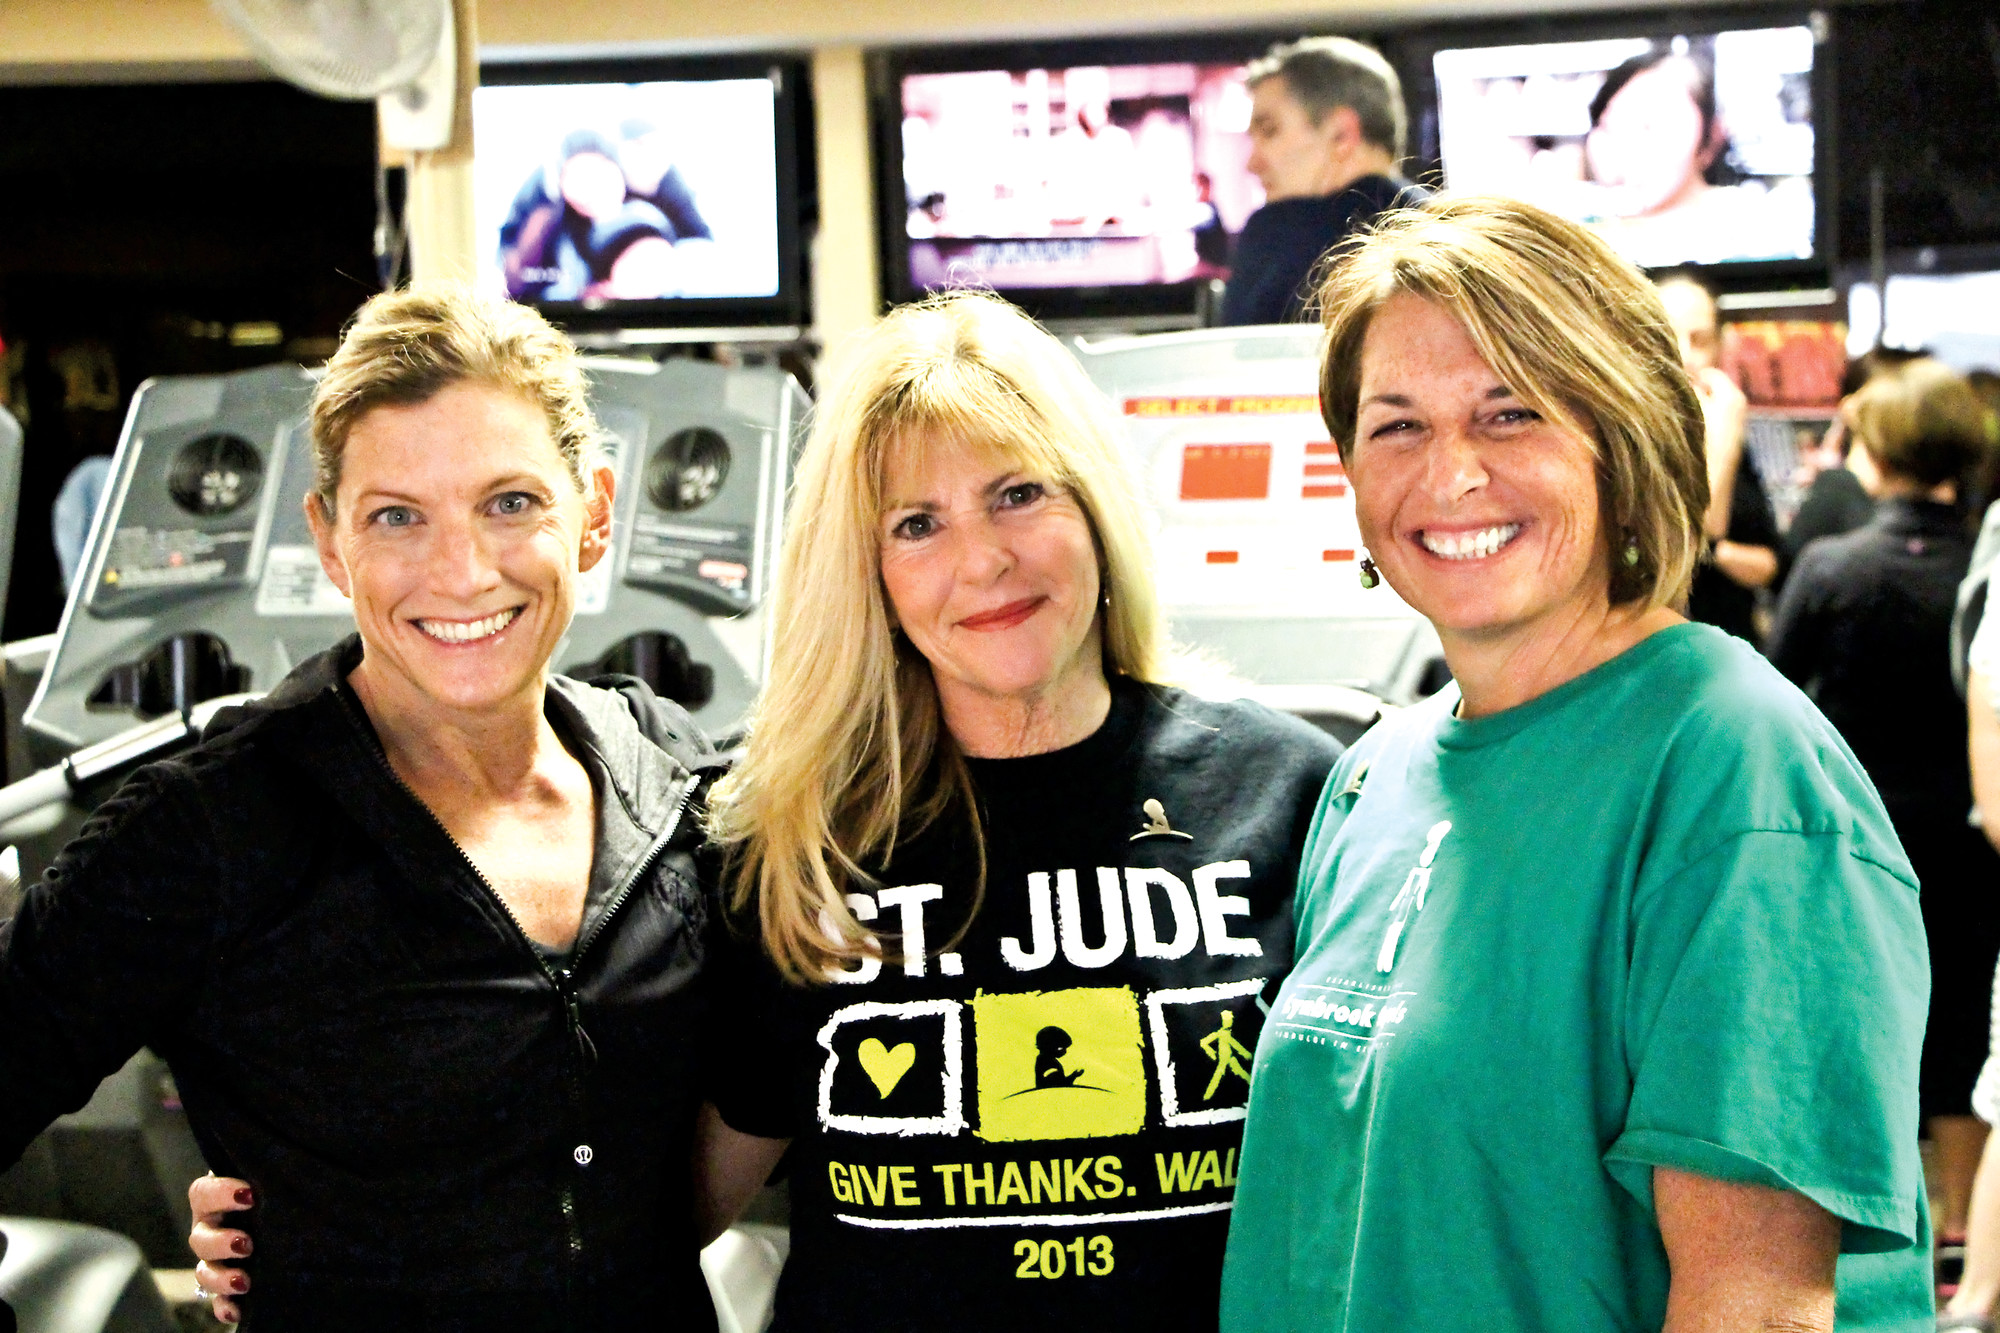 Instructor Carolyn Mellace, left, organizer Patti Birnbaum and Deena Clancy of Lynbrook Bagels. The three women worked together to raise more than $8,000 for St. Jude Children’s Research Hospital.